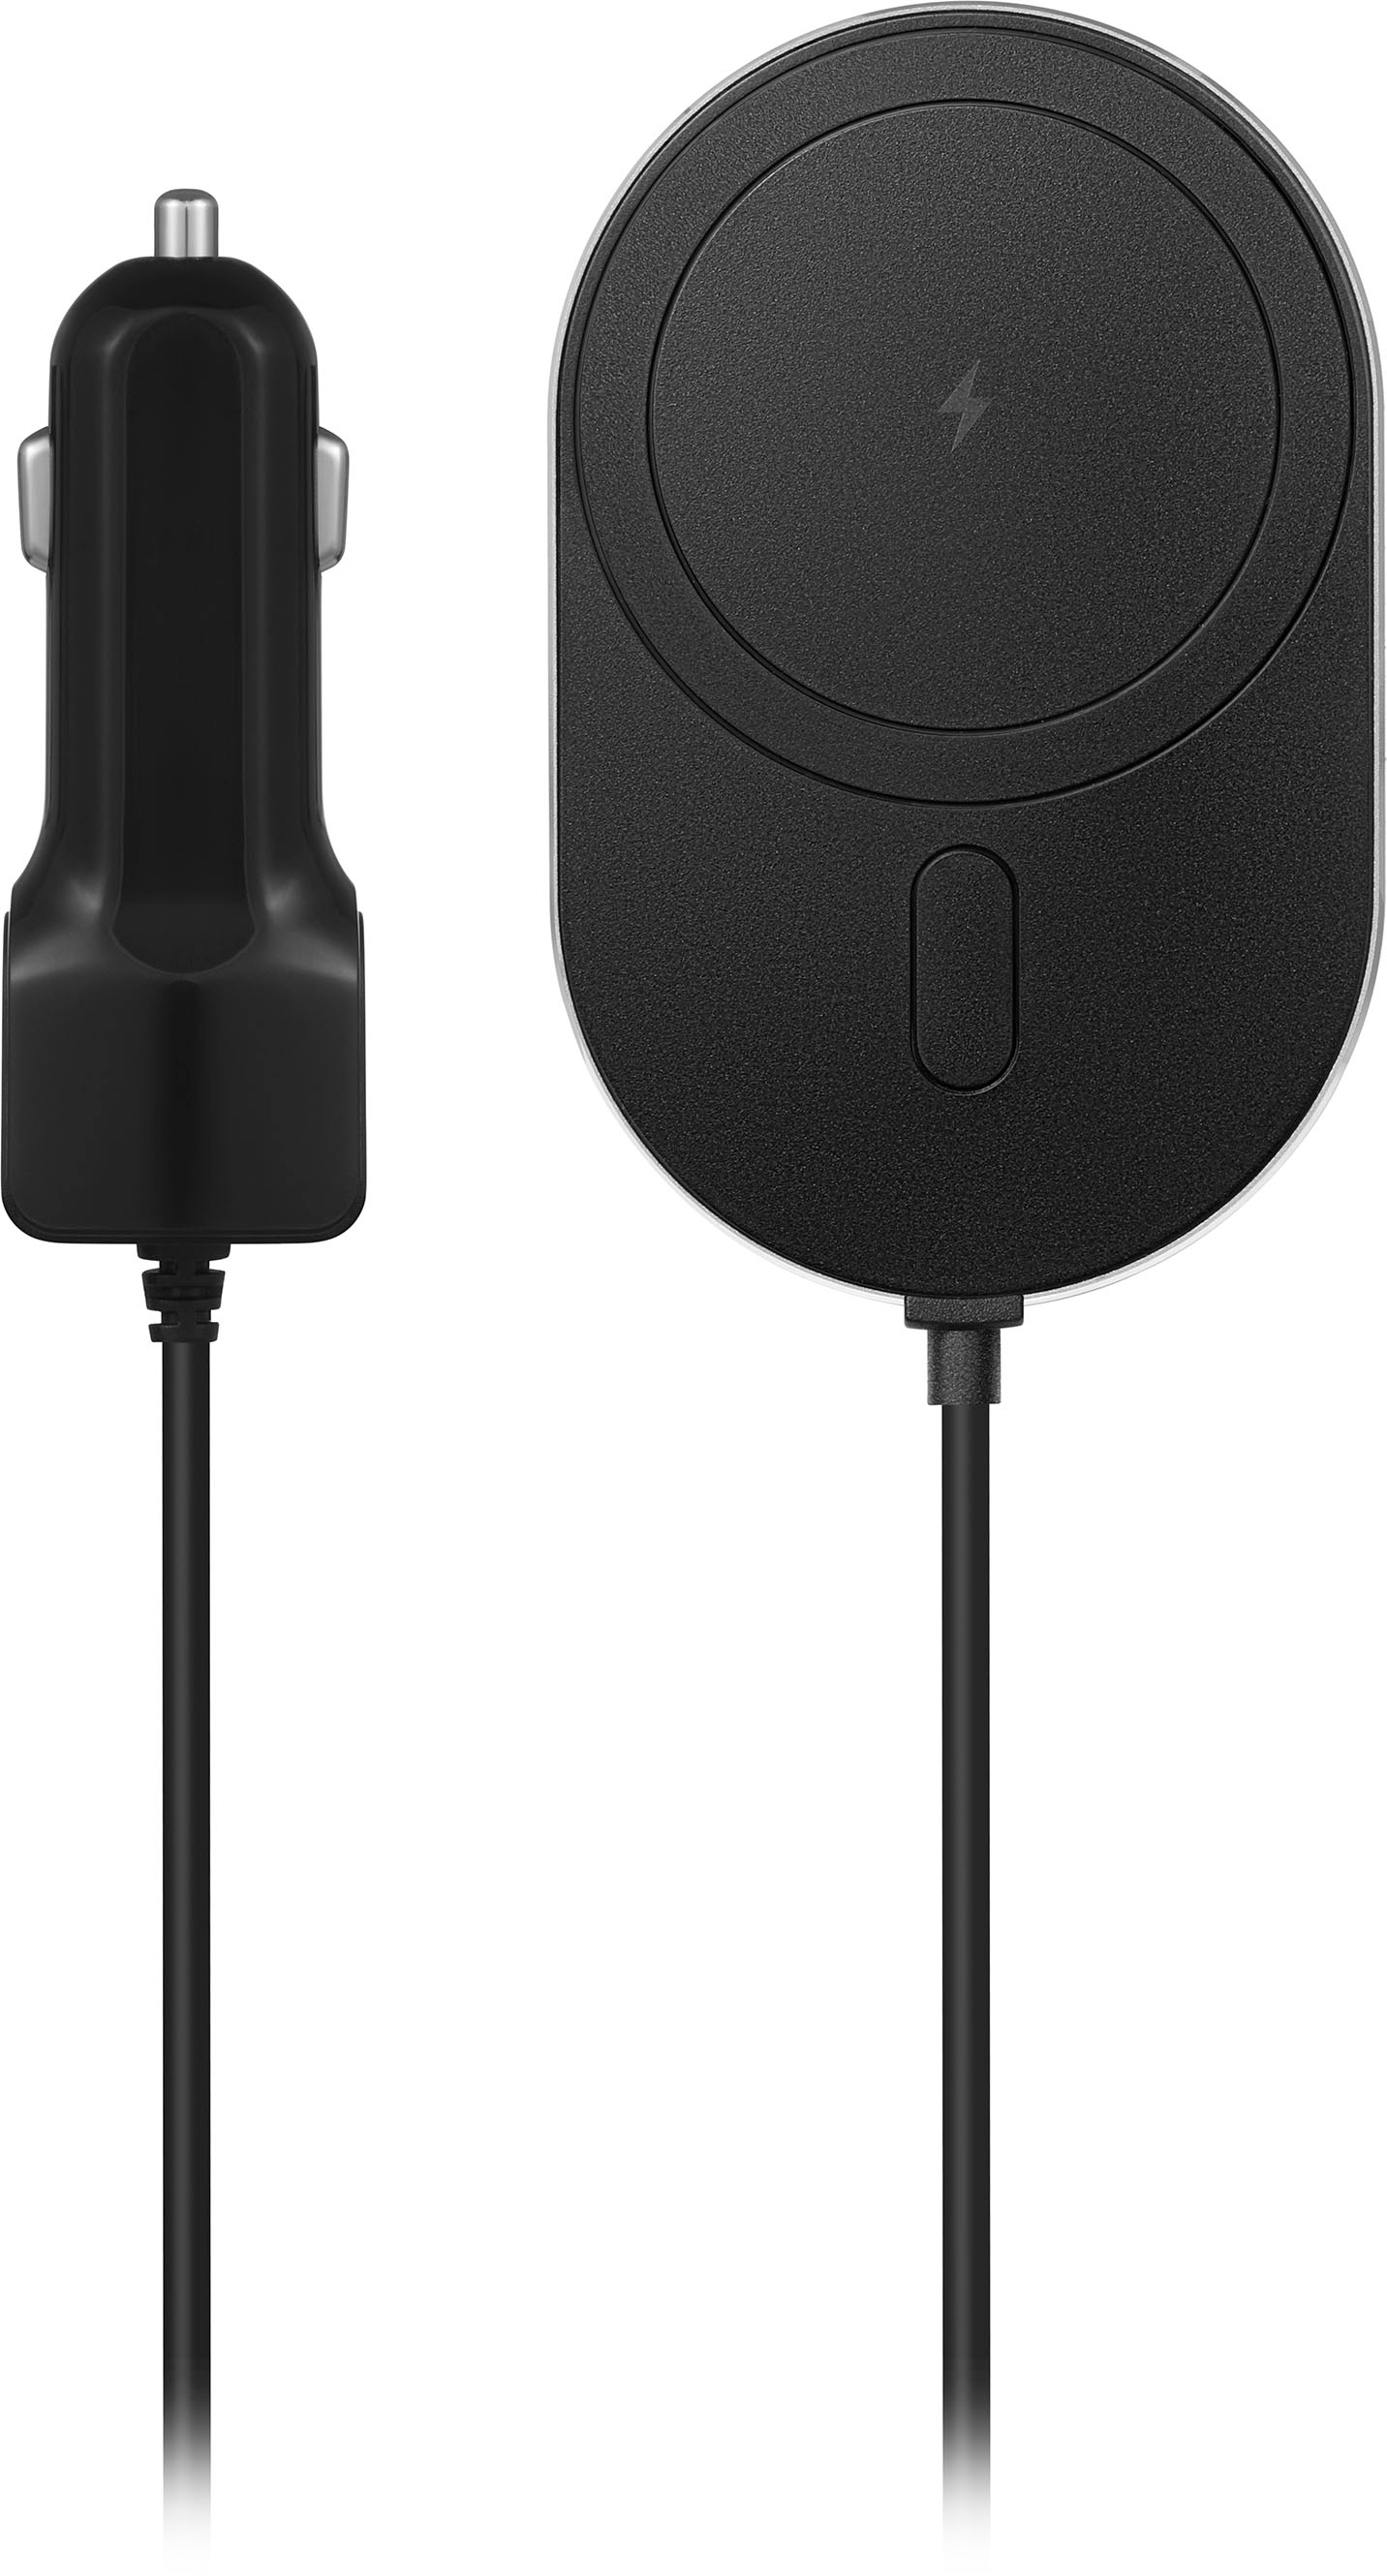 Best Car Chargers for Android and iPhone - Alibaba.com Reads